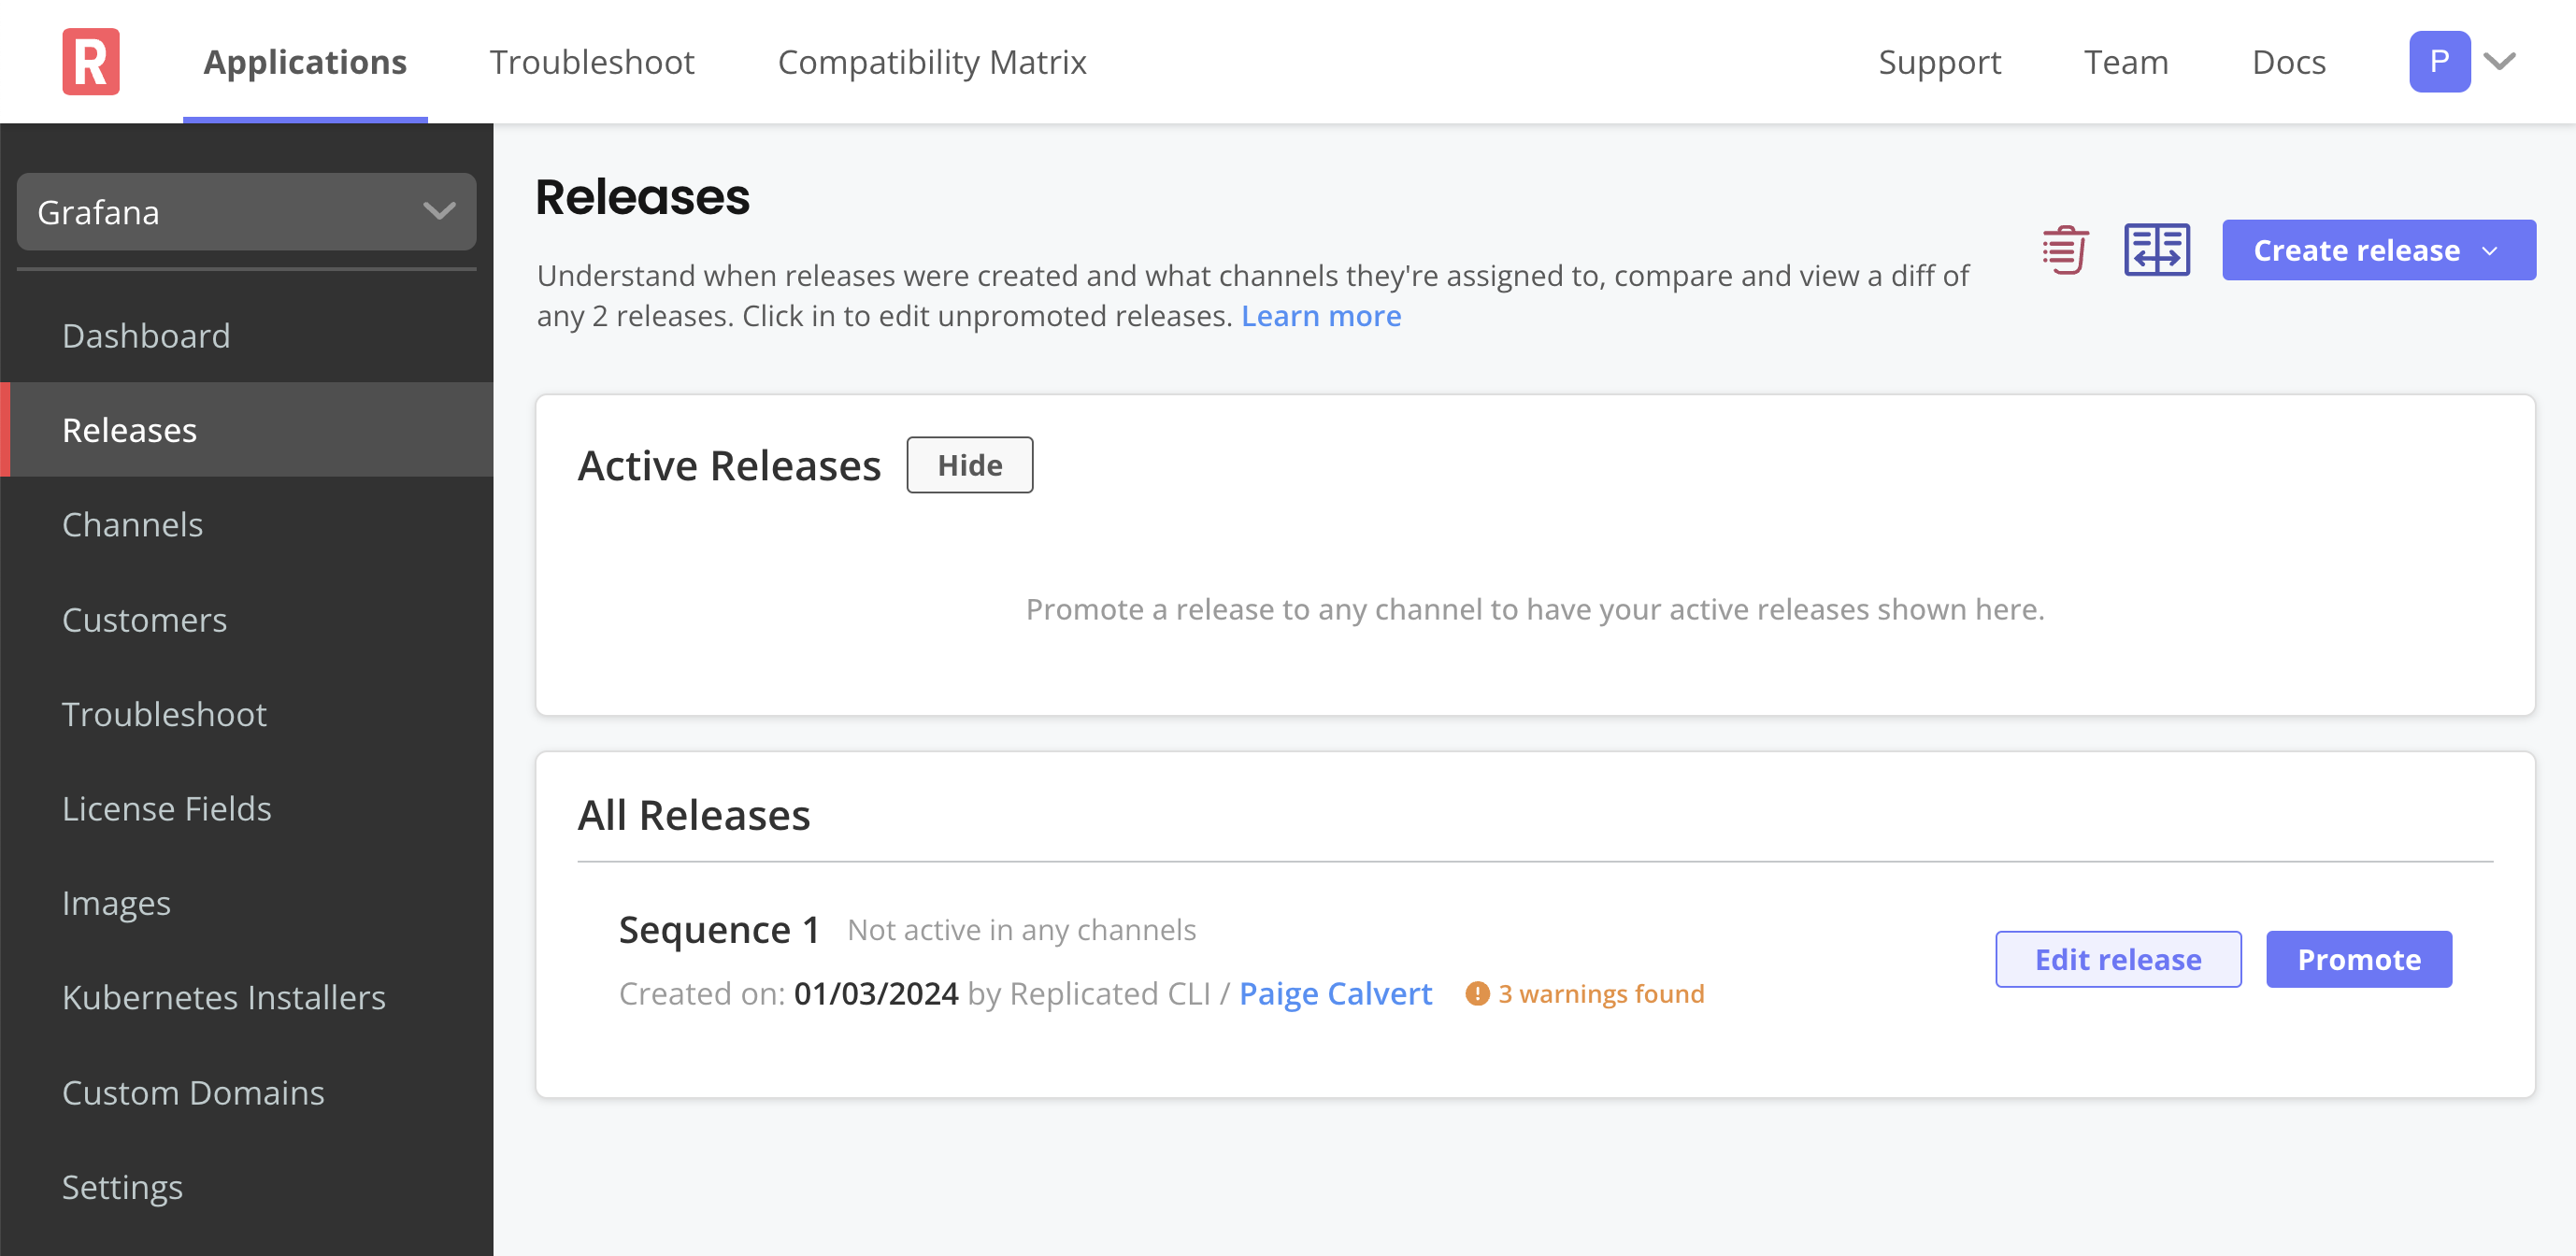 Release page in the vendor portal with one release